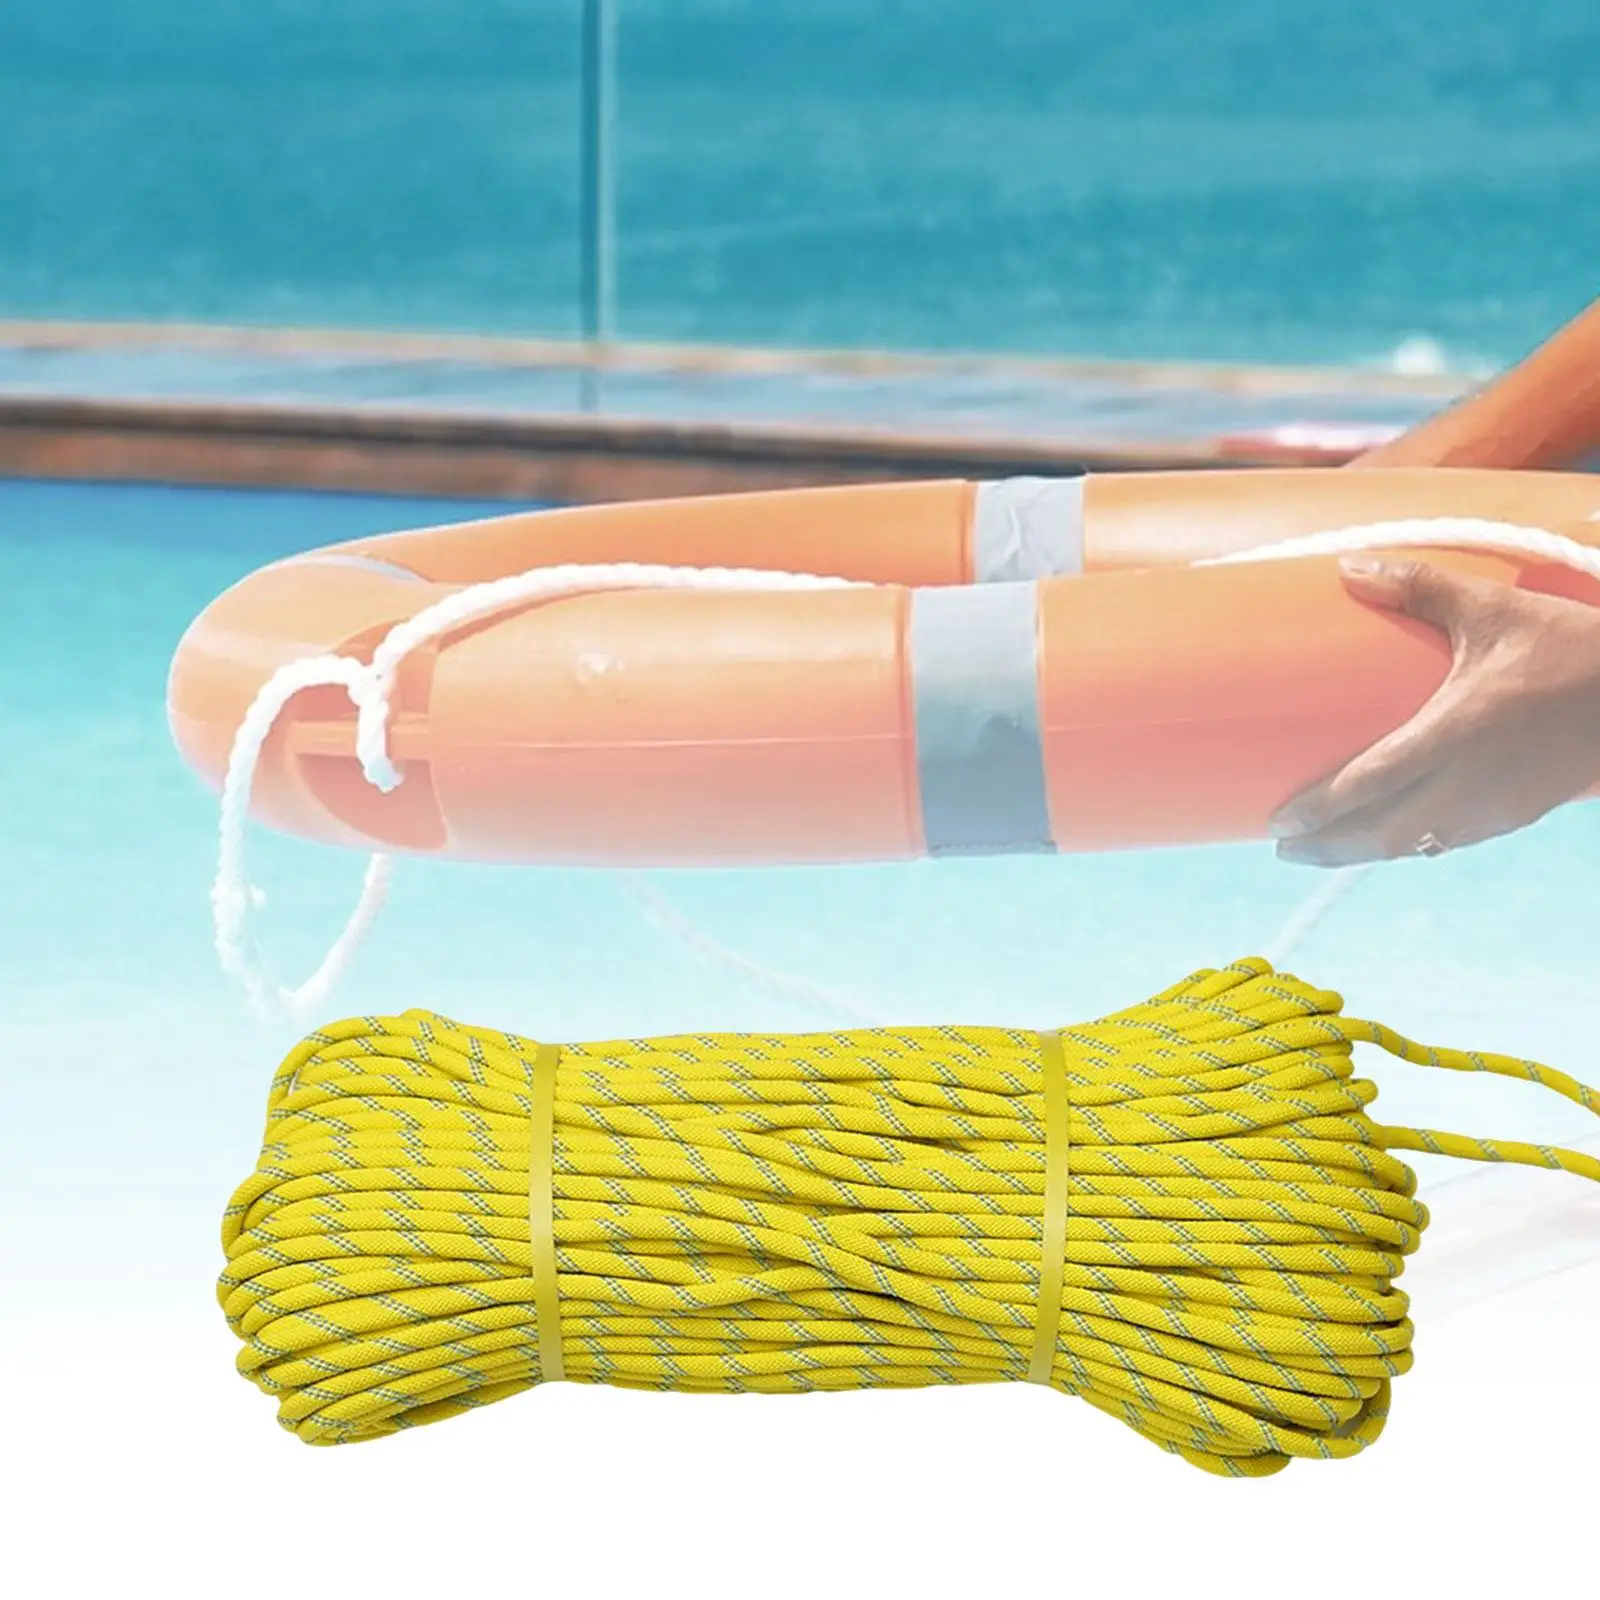 30M Throw Rope Accessories Flotation Device High Visibility Water Floating Rope for Outdoor Swimming Fishing Rafting Kayaking